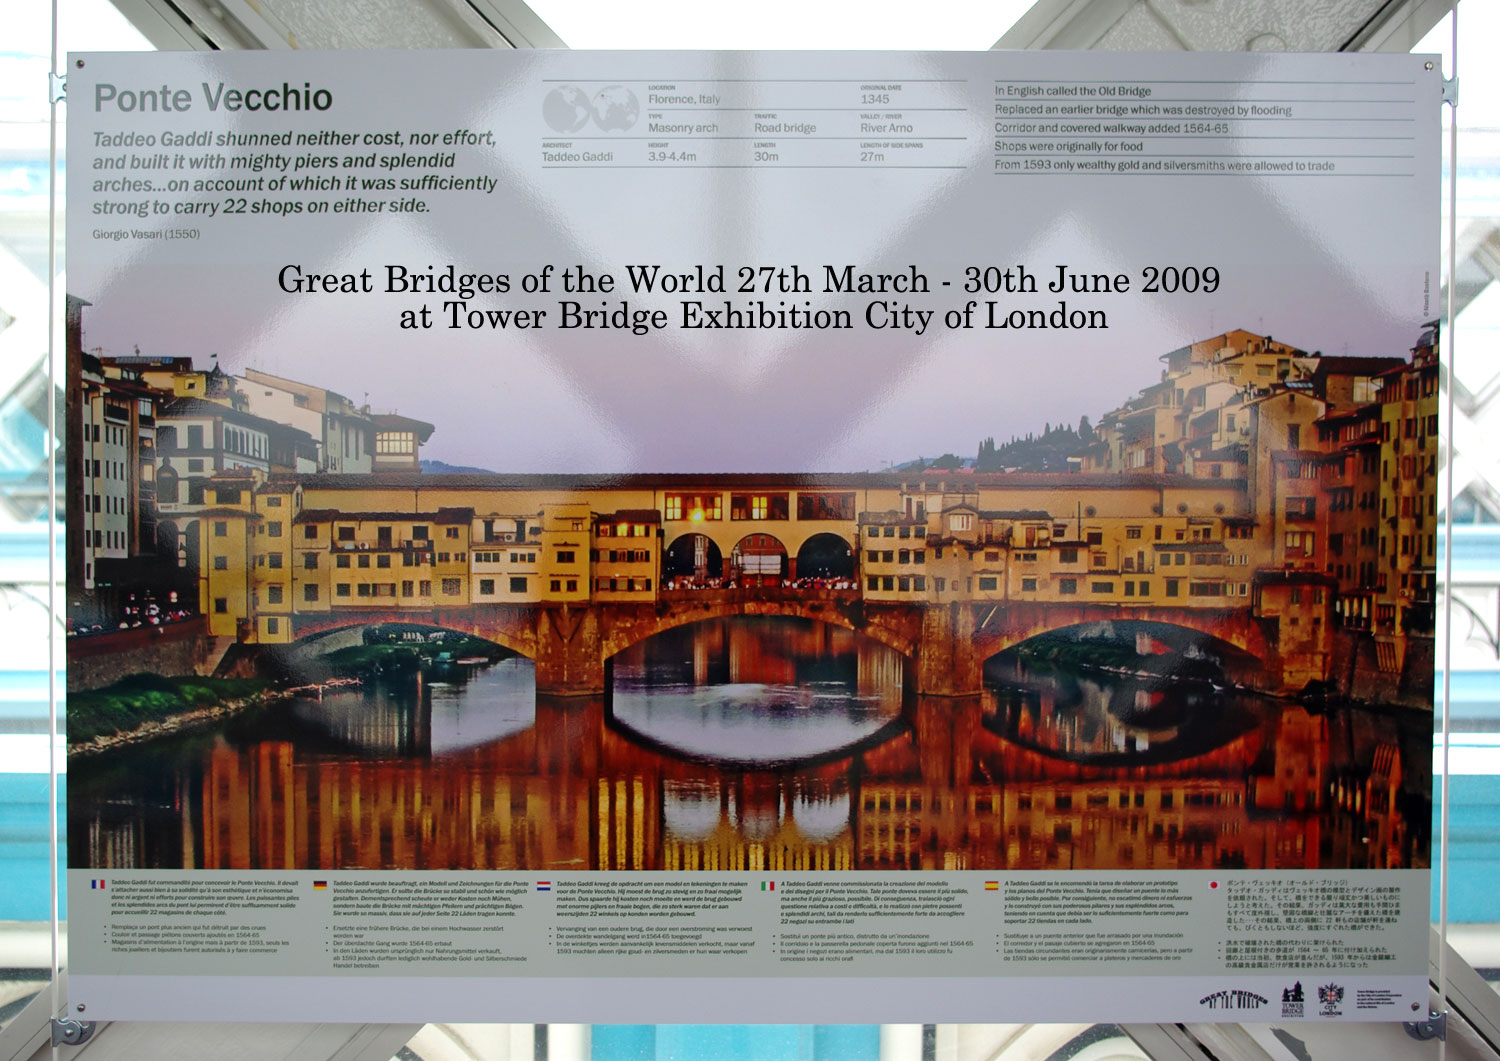 Great Bridges of the World 27th March - 30th June 2009 at Tower Bridge Exhibition City of London